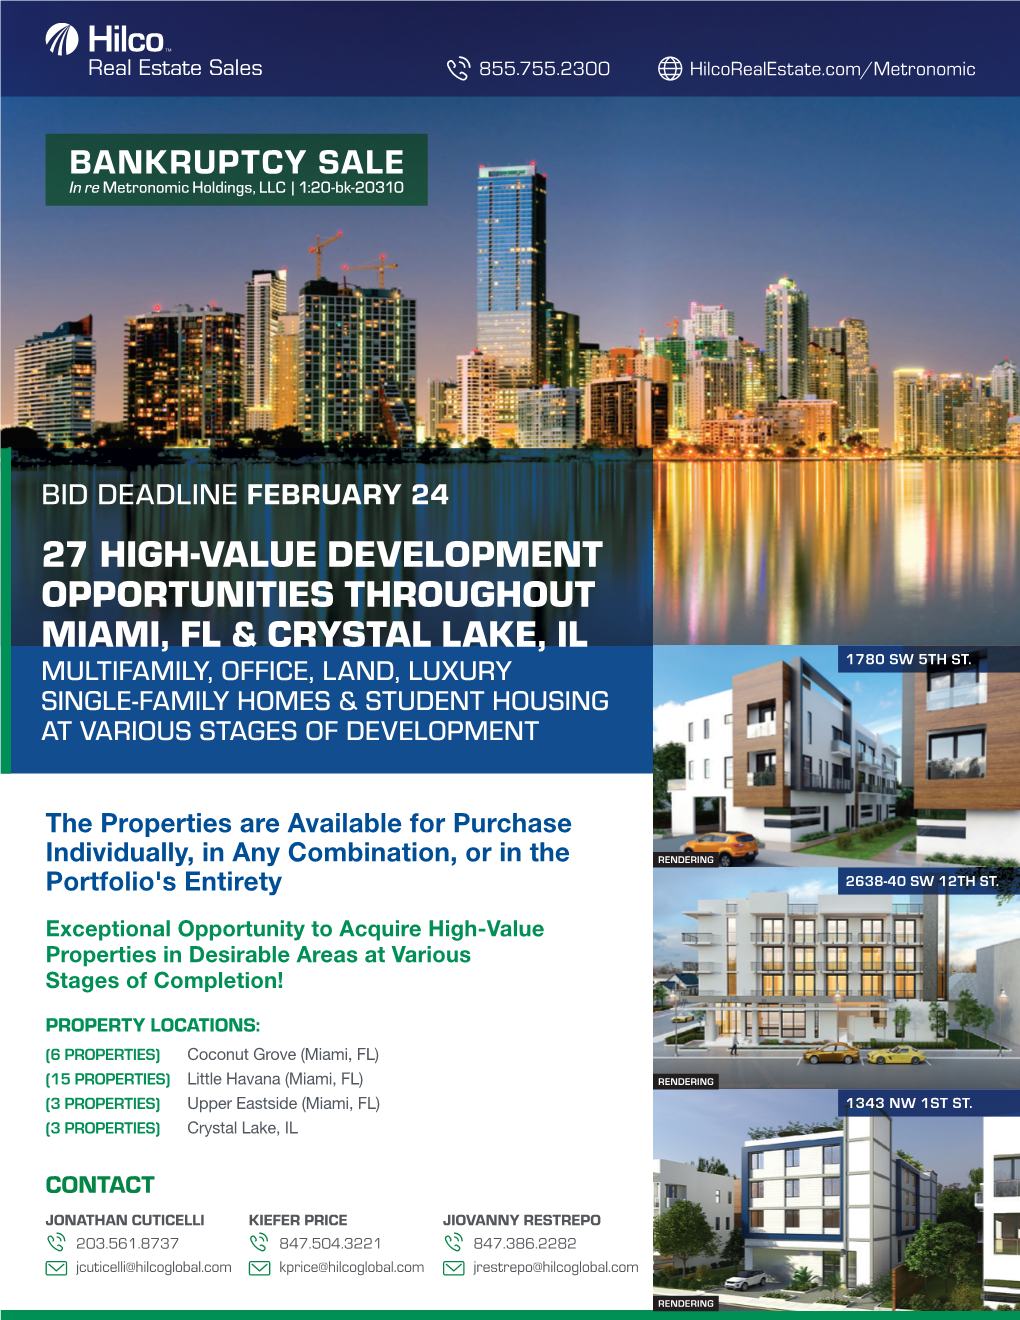 27 High-Value Development Opportunities Throughout Miami, Fl & Crystal Lake, Il Multifamily, Office, Land, Luxury 1780 Sw 5Th St